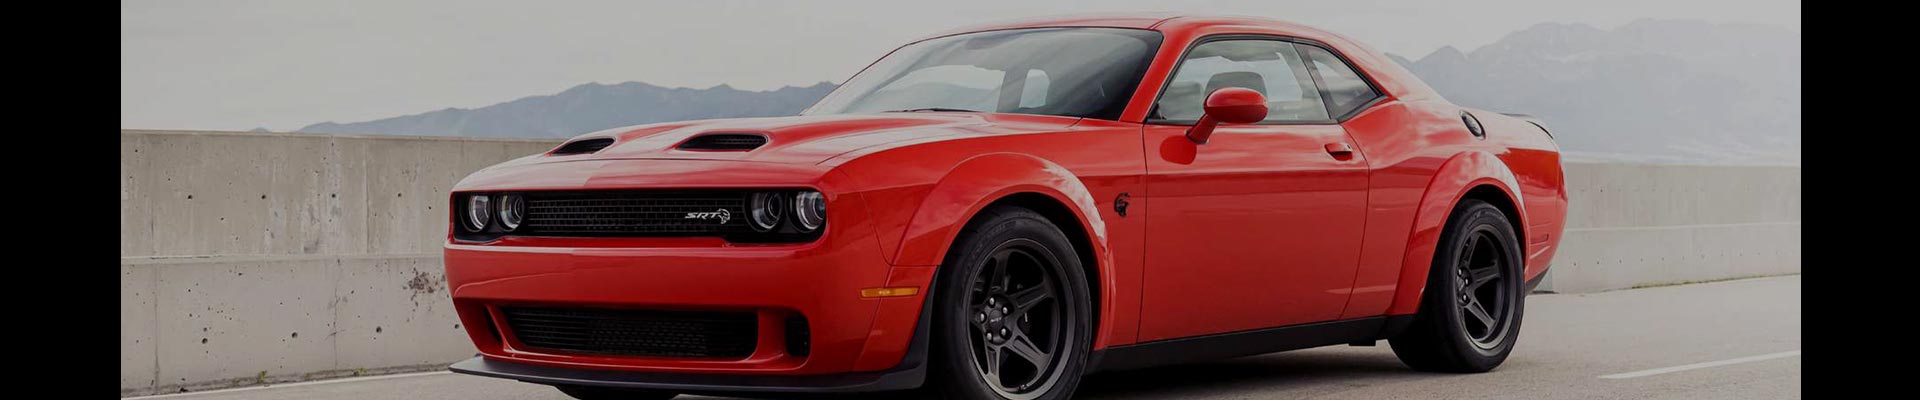 Shop Replacement and OEM 2013 Dodge Challenger Parts with Discounted Price on the Net